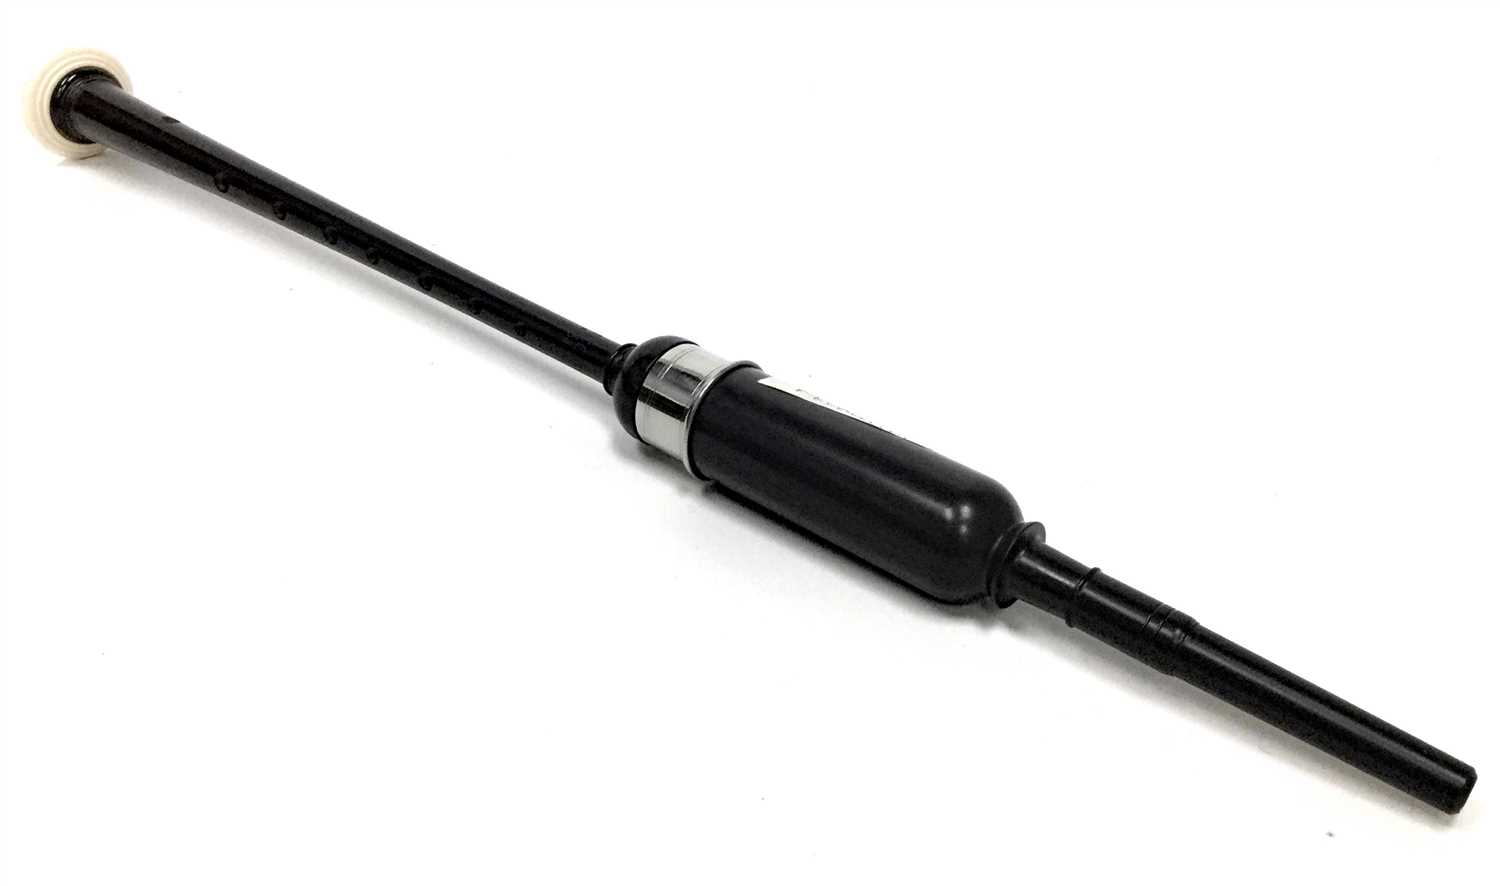 Lot 29 - A PRACTICE CHANTER BY MCCALLUM BAGPIPES